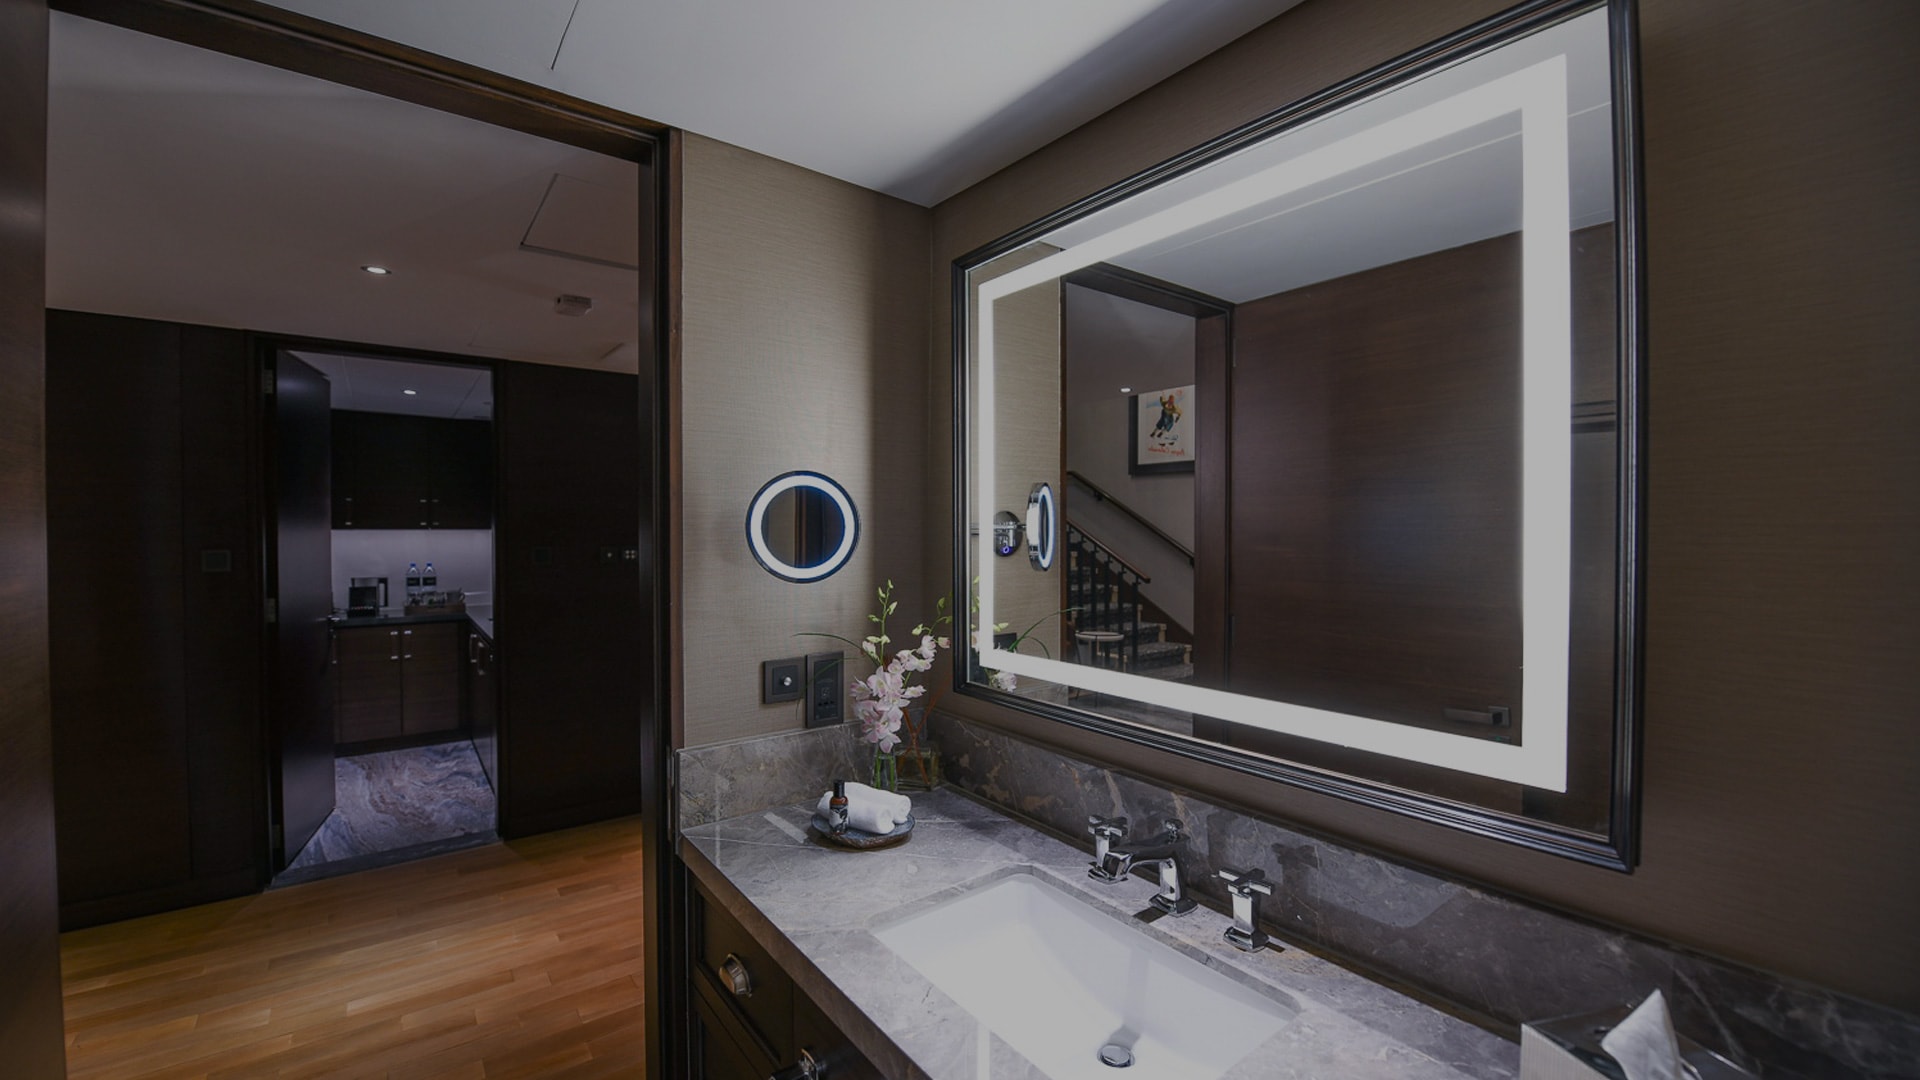 Reflecting Your Style: Custom Mirrors For Every Space